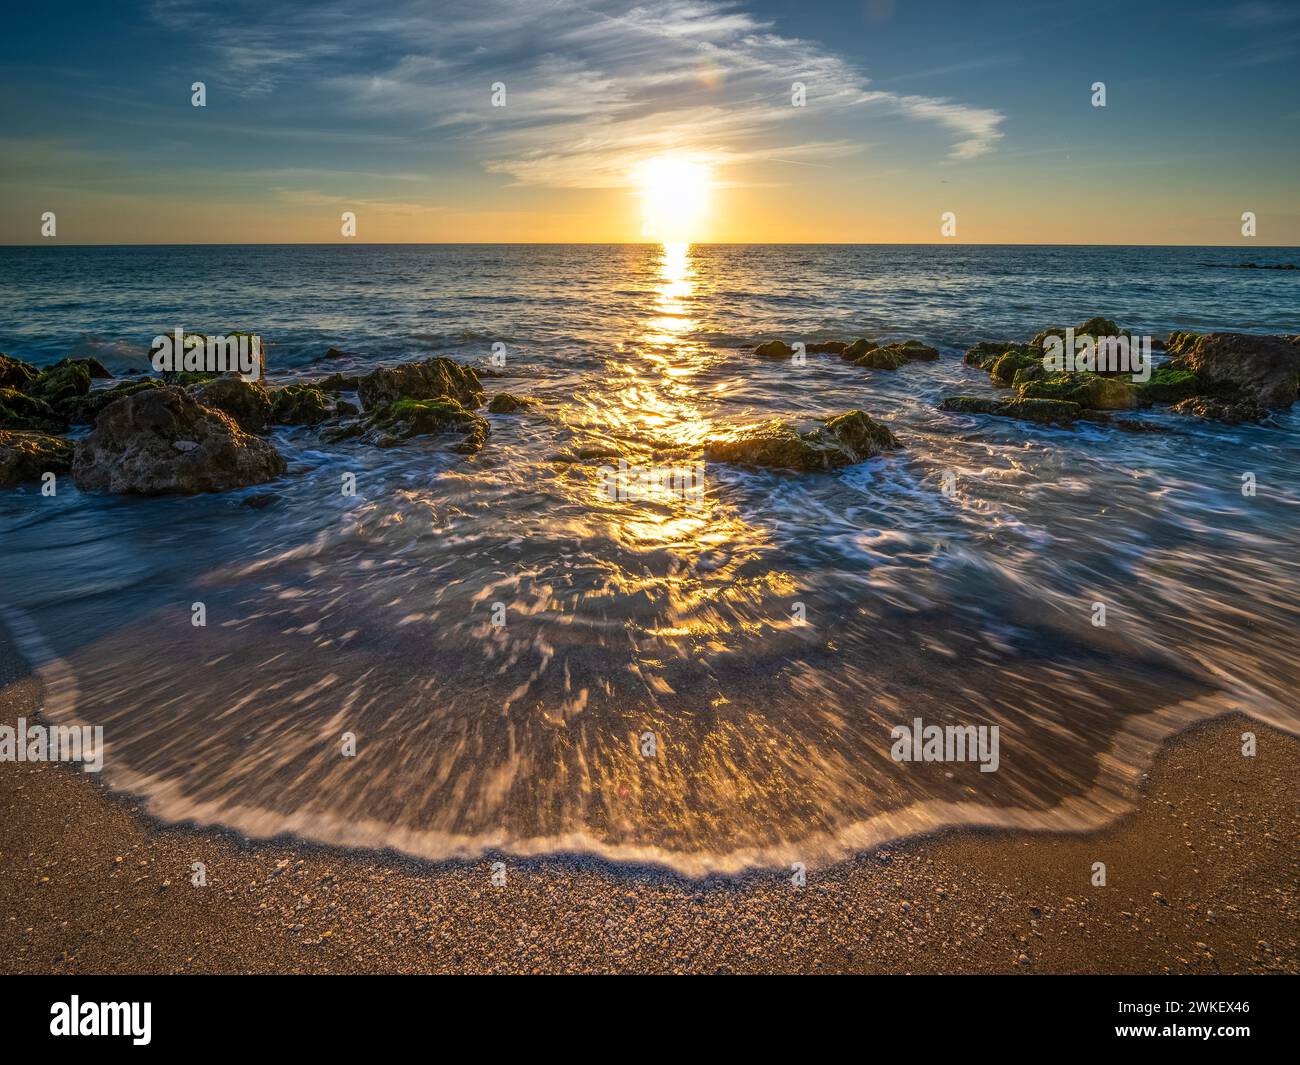 Small waves washing up on rocky beach of the Gulf of Mexico at Caspersen Beach at sunset in Venice Florida USA Stock Photo